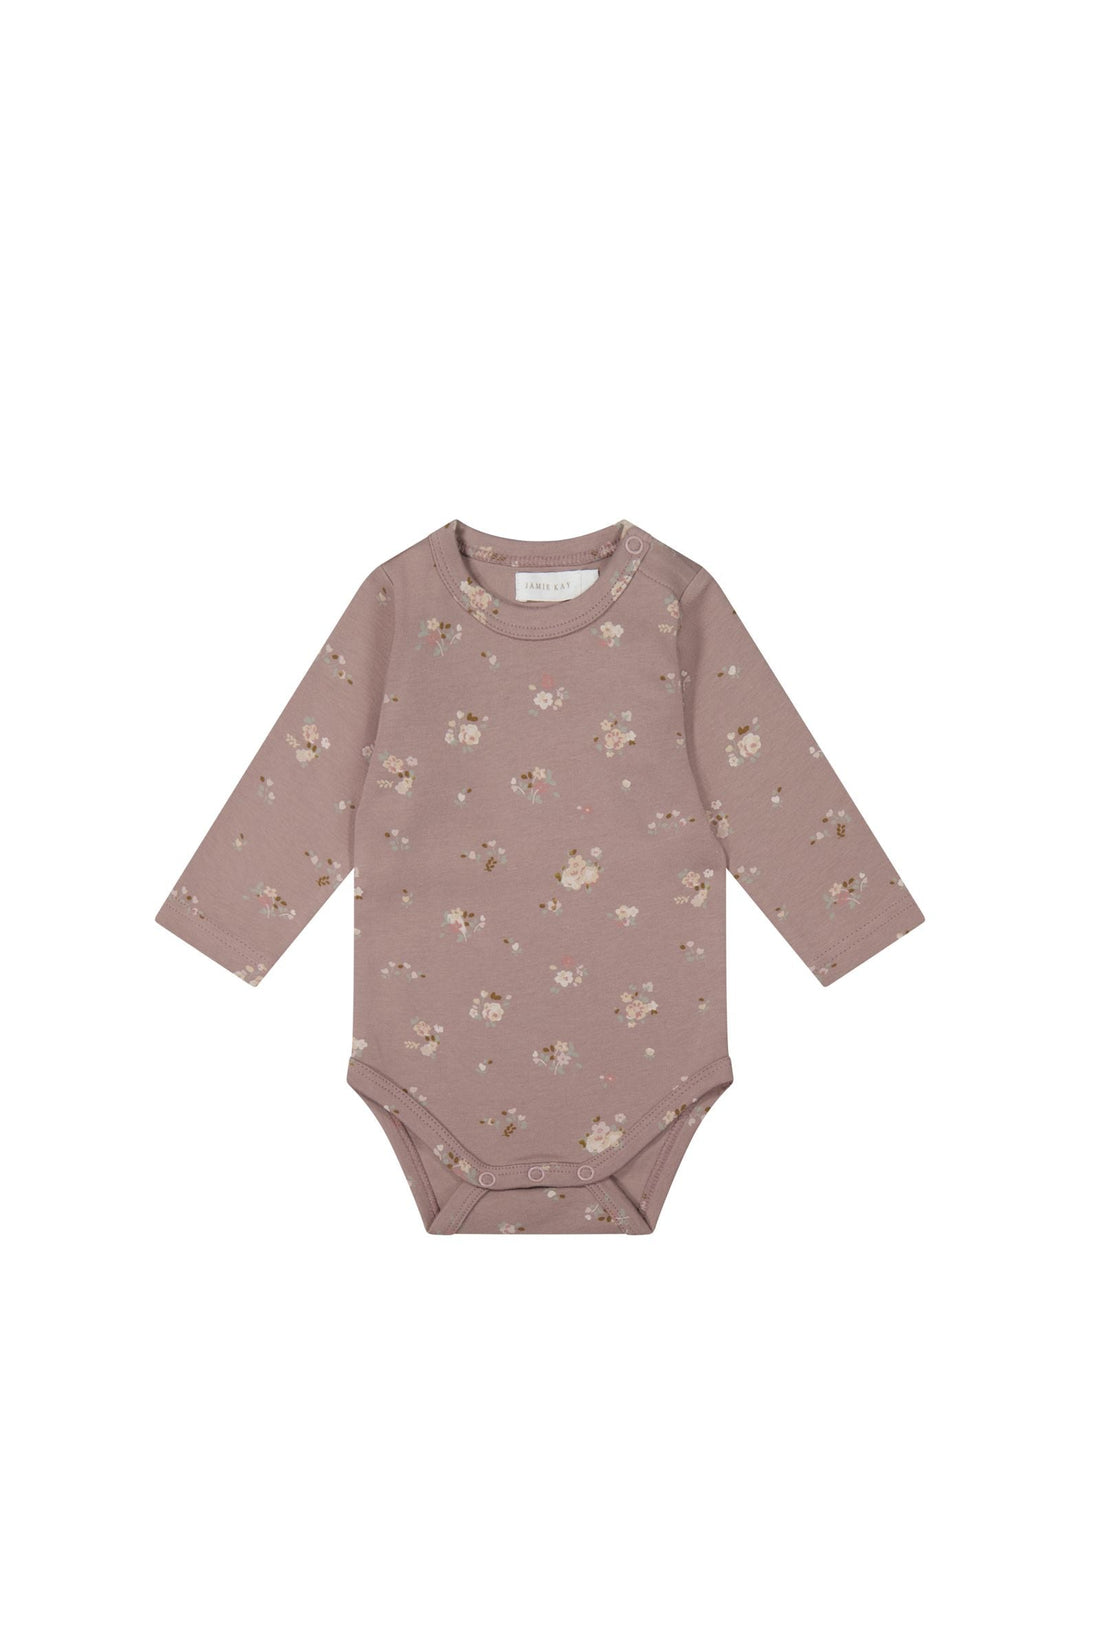 COLORED ORGANICS Long Sleeve Body Suit GOTS Certified Organic Cotton 100 %  – PEACE SKETCH